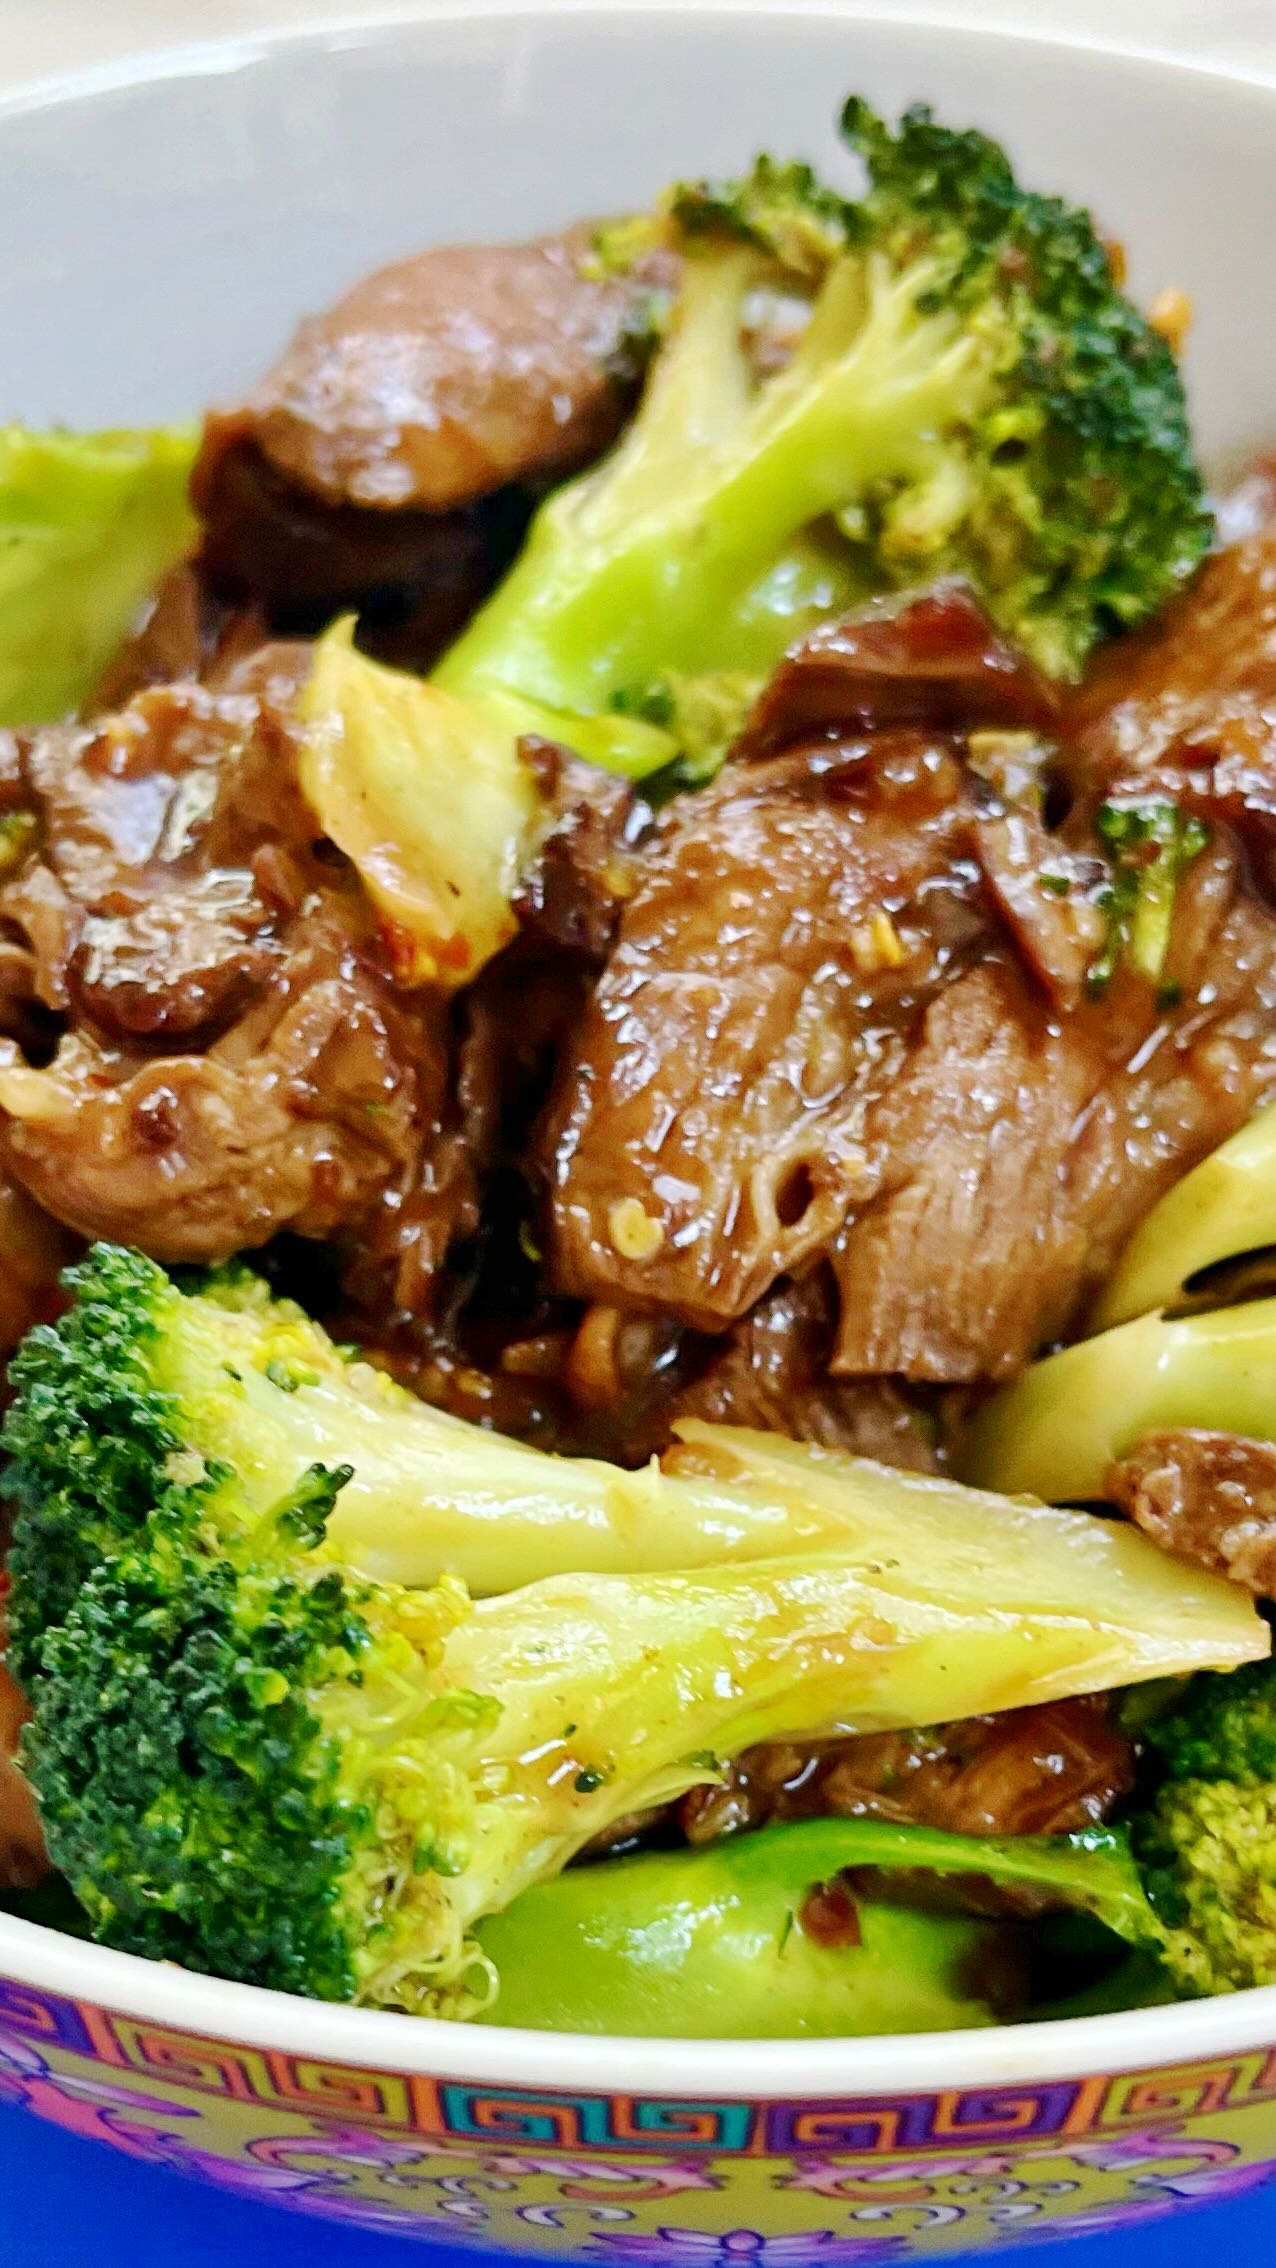 Beef & Broccoli Stir fry that is just as tasty as your favorite takeout but takes 10 minutes to make?!? Yes! I transform leftover steak and steamed broccoli into a delicious wok fried meal that I can cook in the time it would take me to order it online from my local restaurant. Full recipe linked in bio and on the @dinnerreinvented site. #nofoodwaste #leftovers #leftovermakeover #chinesefood #beefandbroccoli #asianfood #asianfusion #foodblogger #foodreel #cookingreels #roniproter #dinnerreinvented #weeknightmeals #easydinnerrecipies #weeknightdinner #easyweeknightdinner